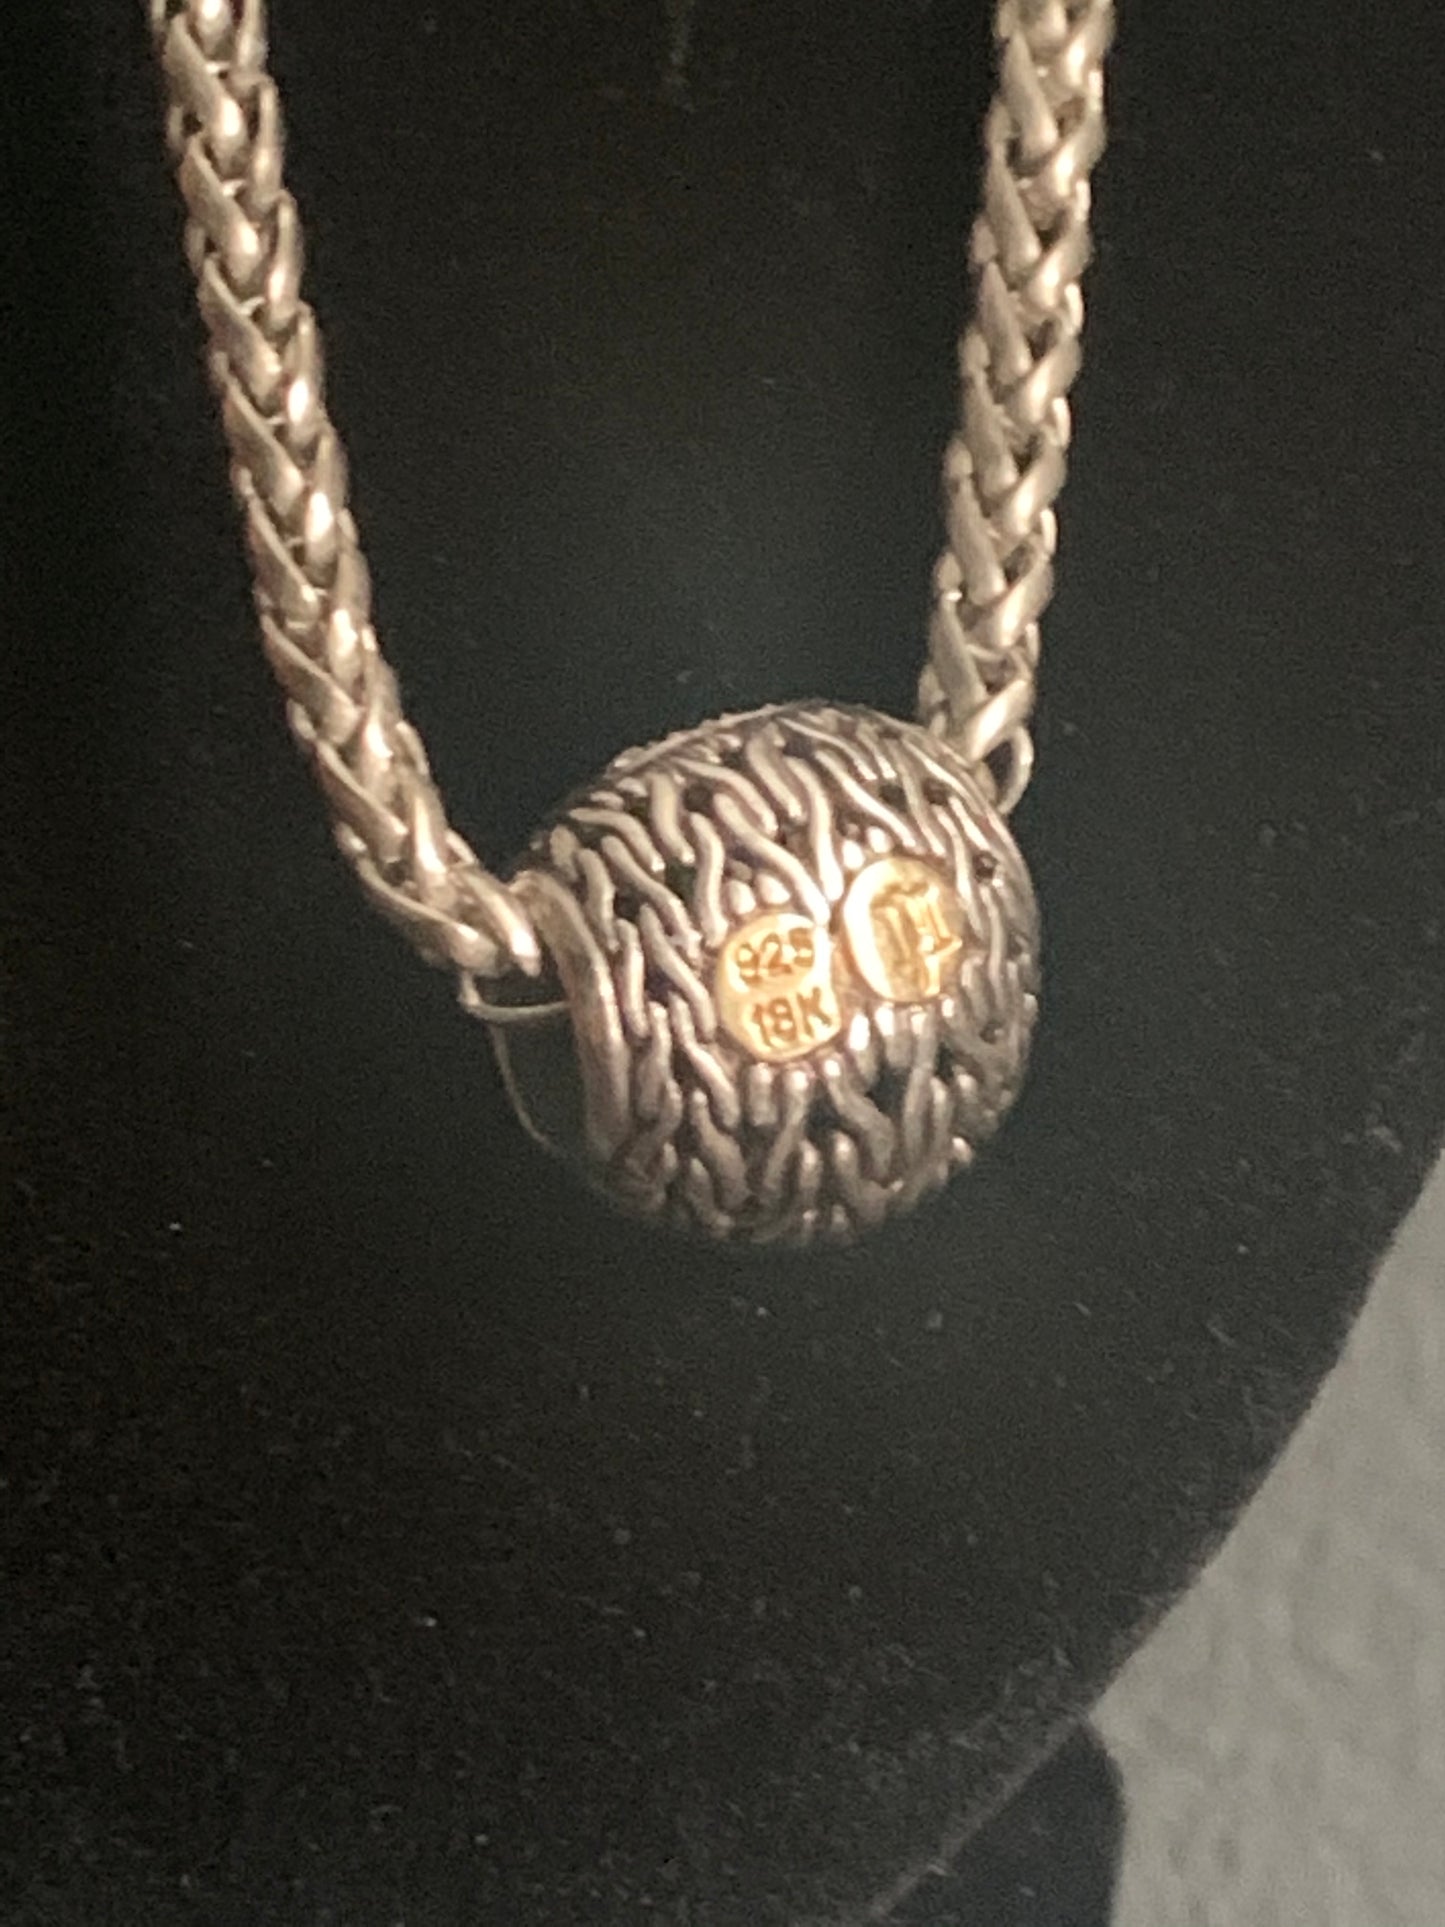 A silver chain with diamond pave pendant